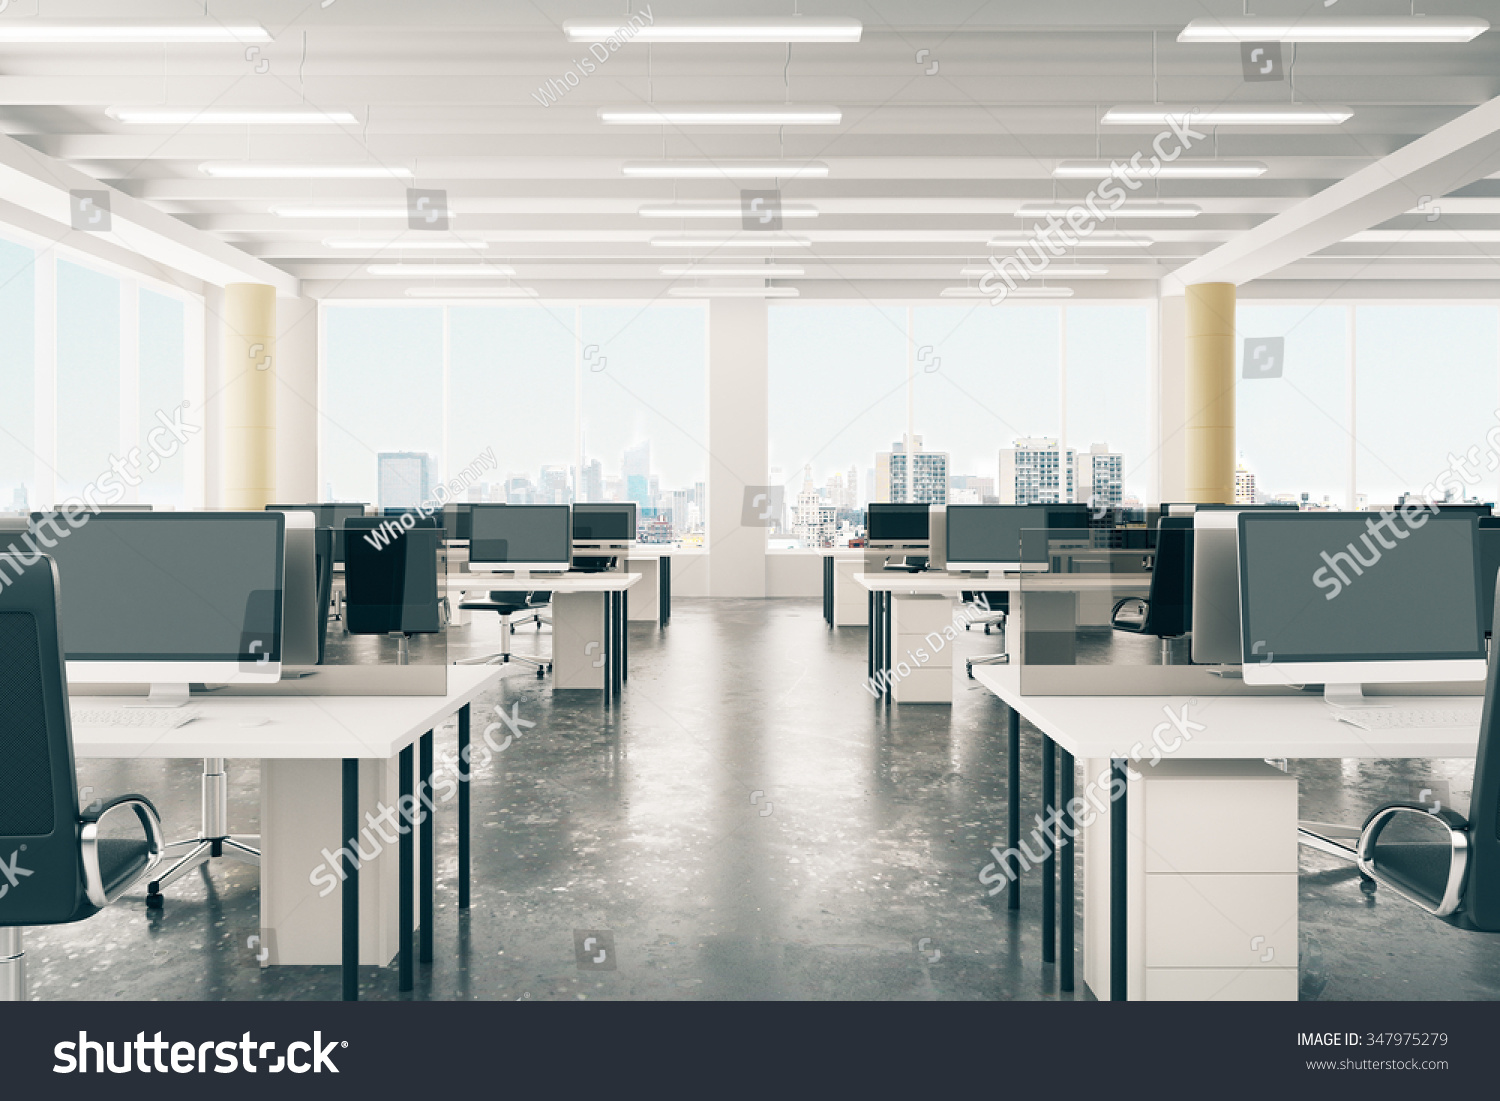 Open space office in loft style hangar with windows in floor and city view 3D Render #347975279